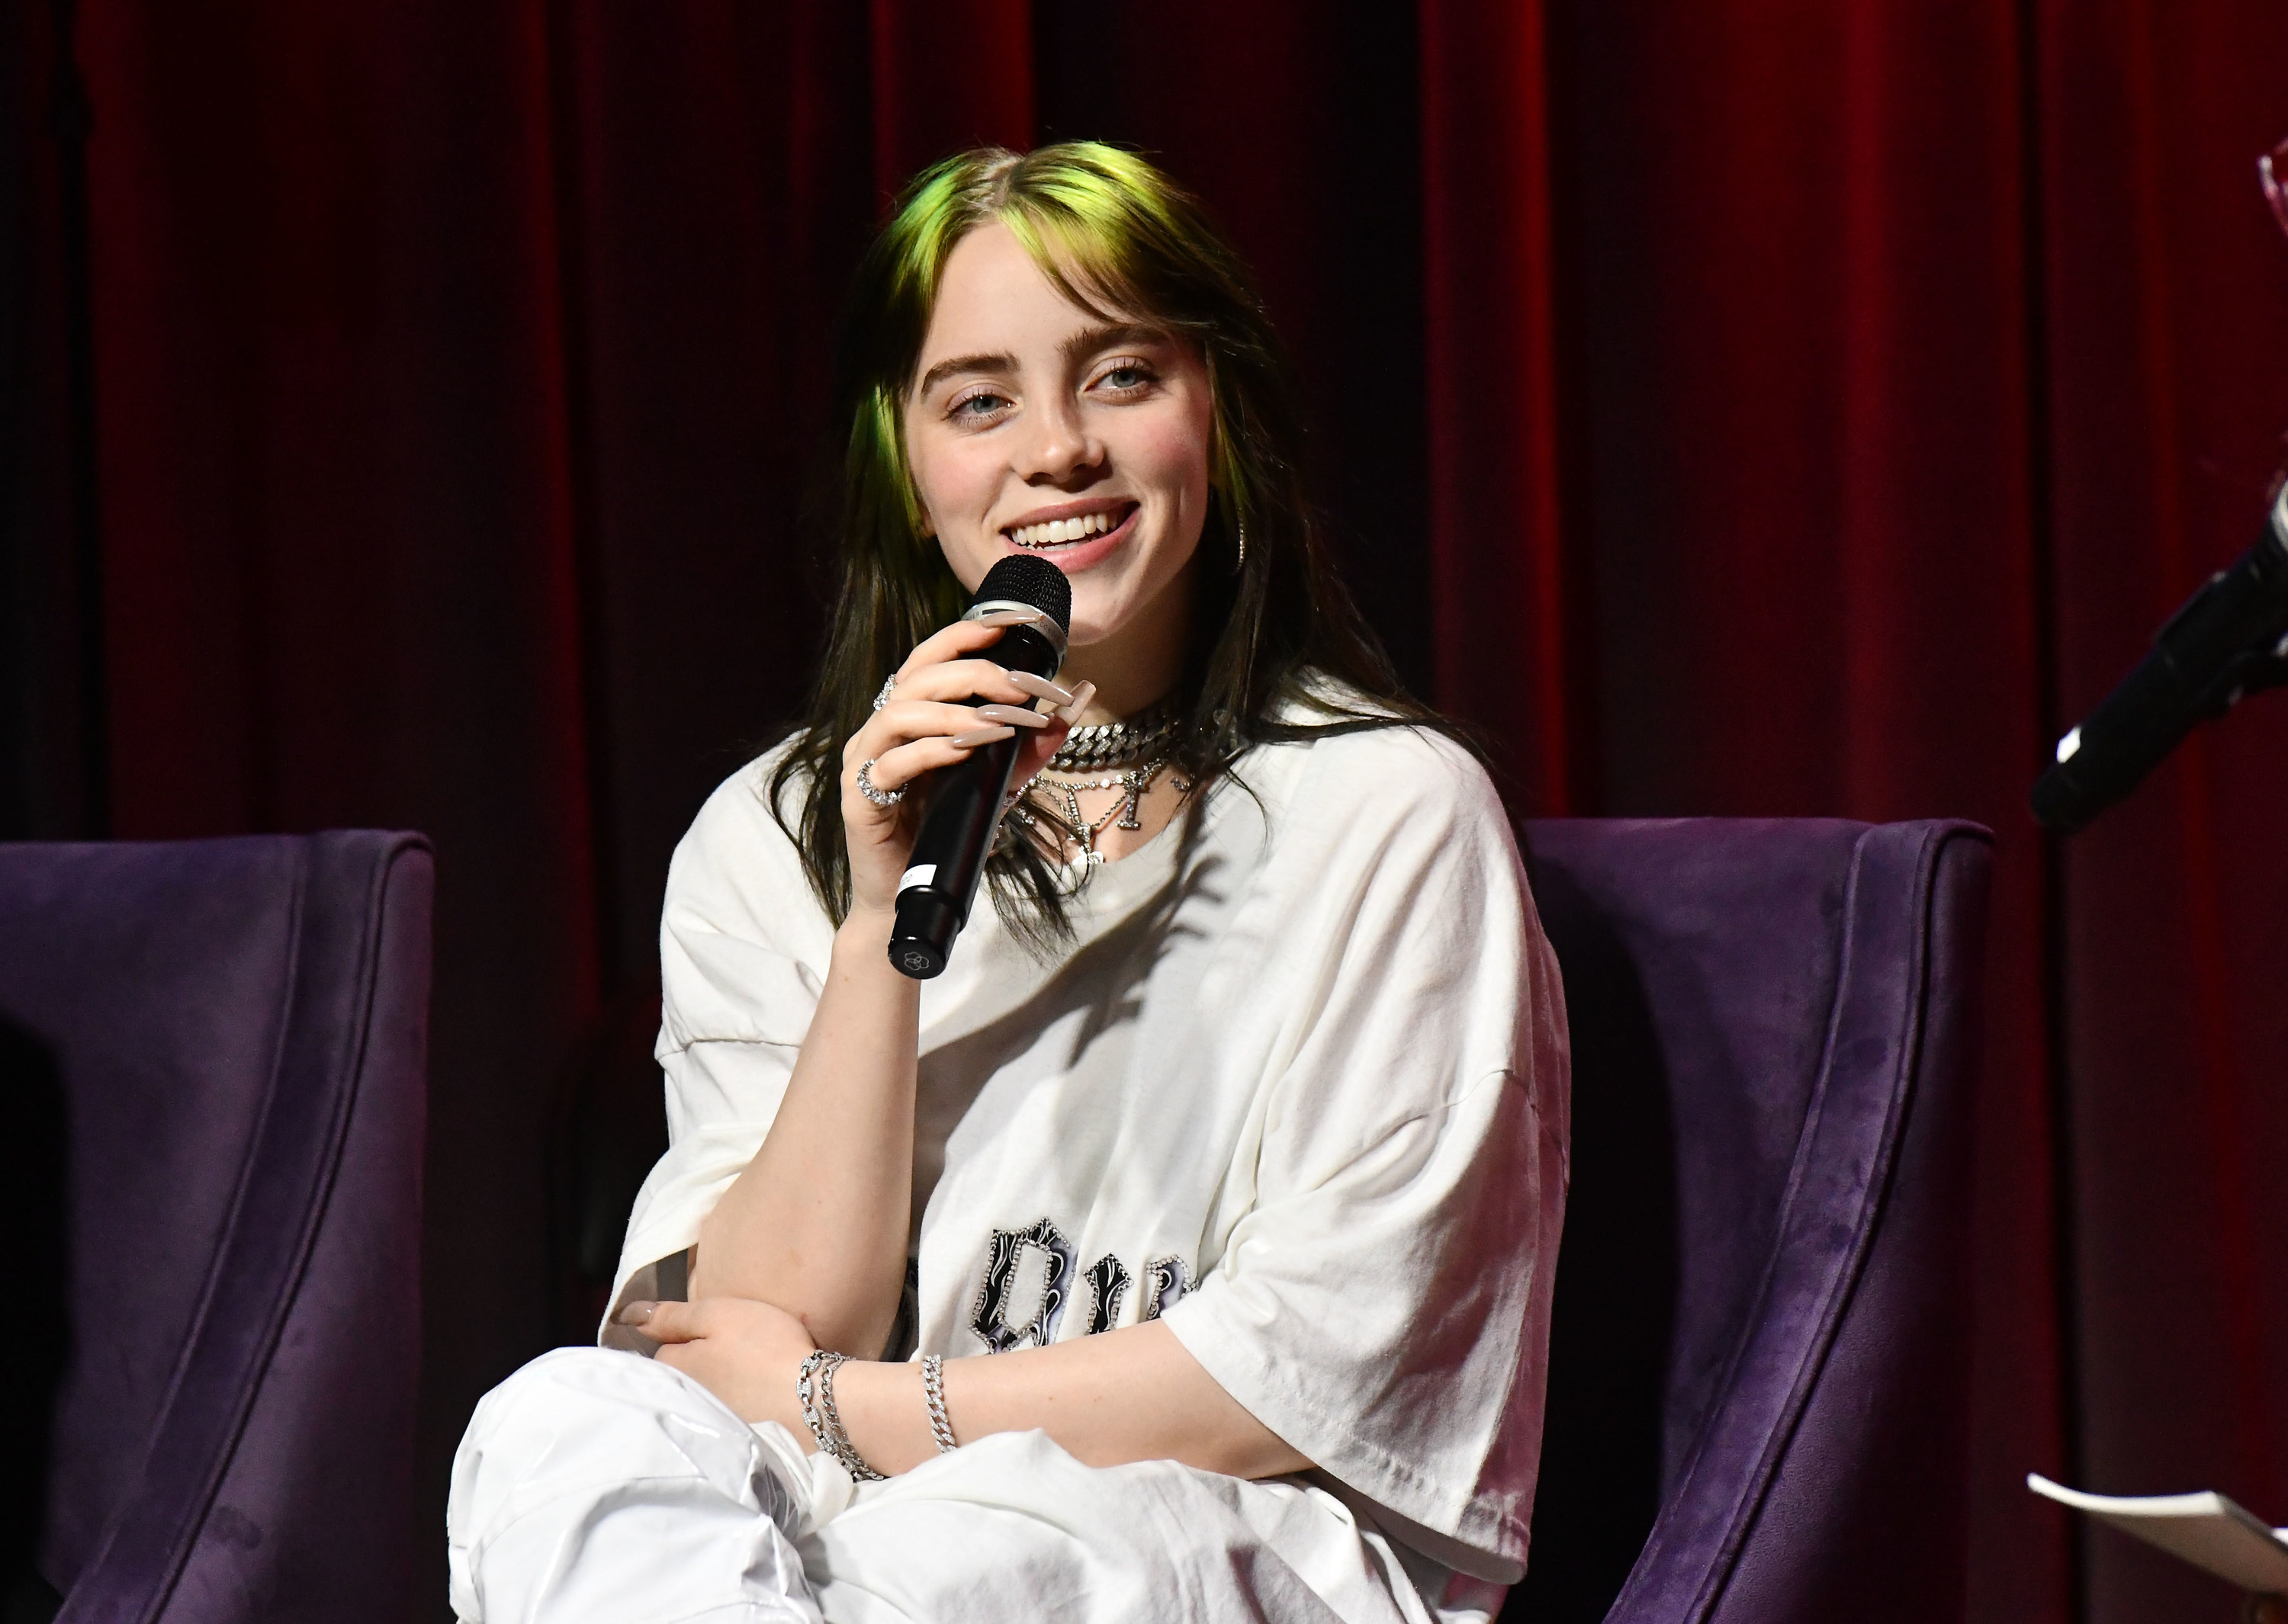 Billie Eilish Revealed Her Favorite Cartoon Character In A Resurfaced Interview And Her Problematic Answer Has Caused A Ton Of Drama